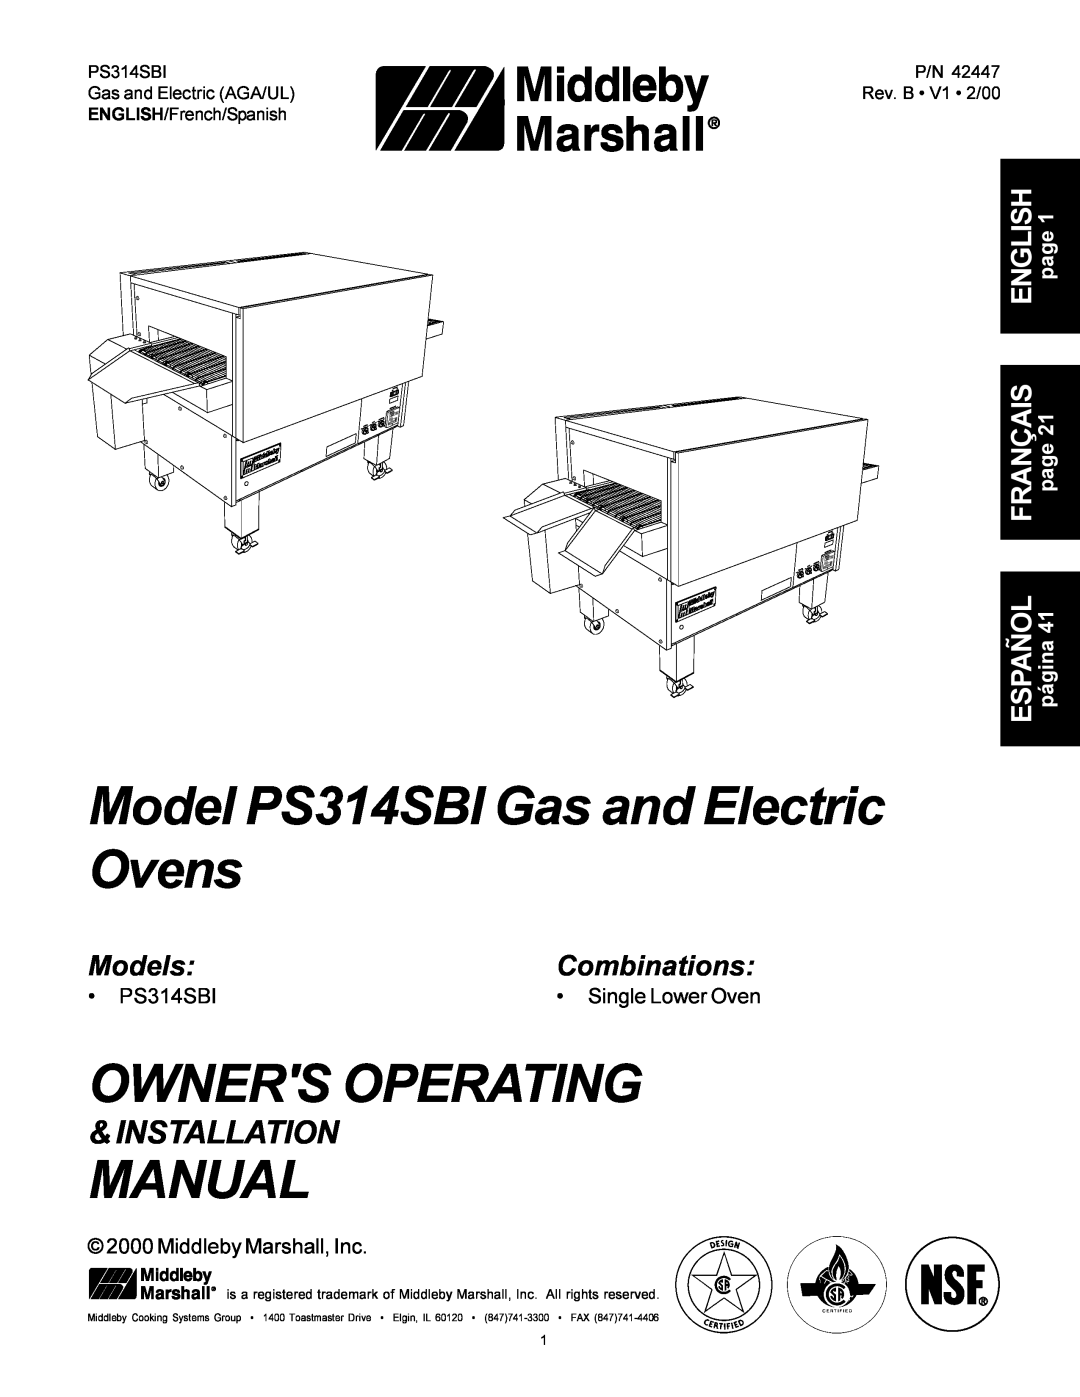 Middleby Marshall installation manual Model PS314SBI Gas and Electric Ovens, Owners Operating, Manual, Installation 